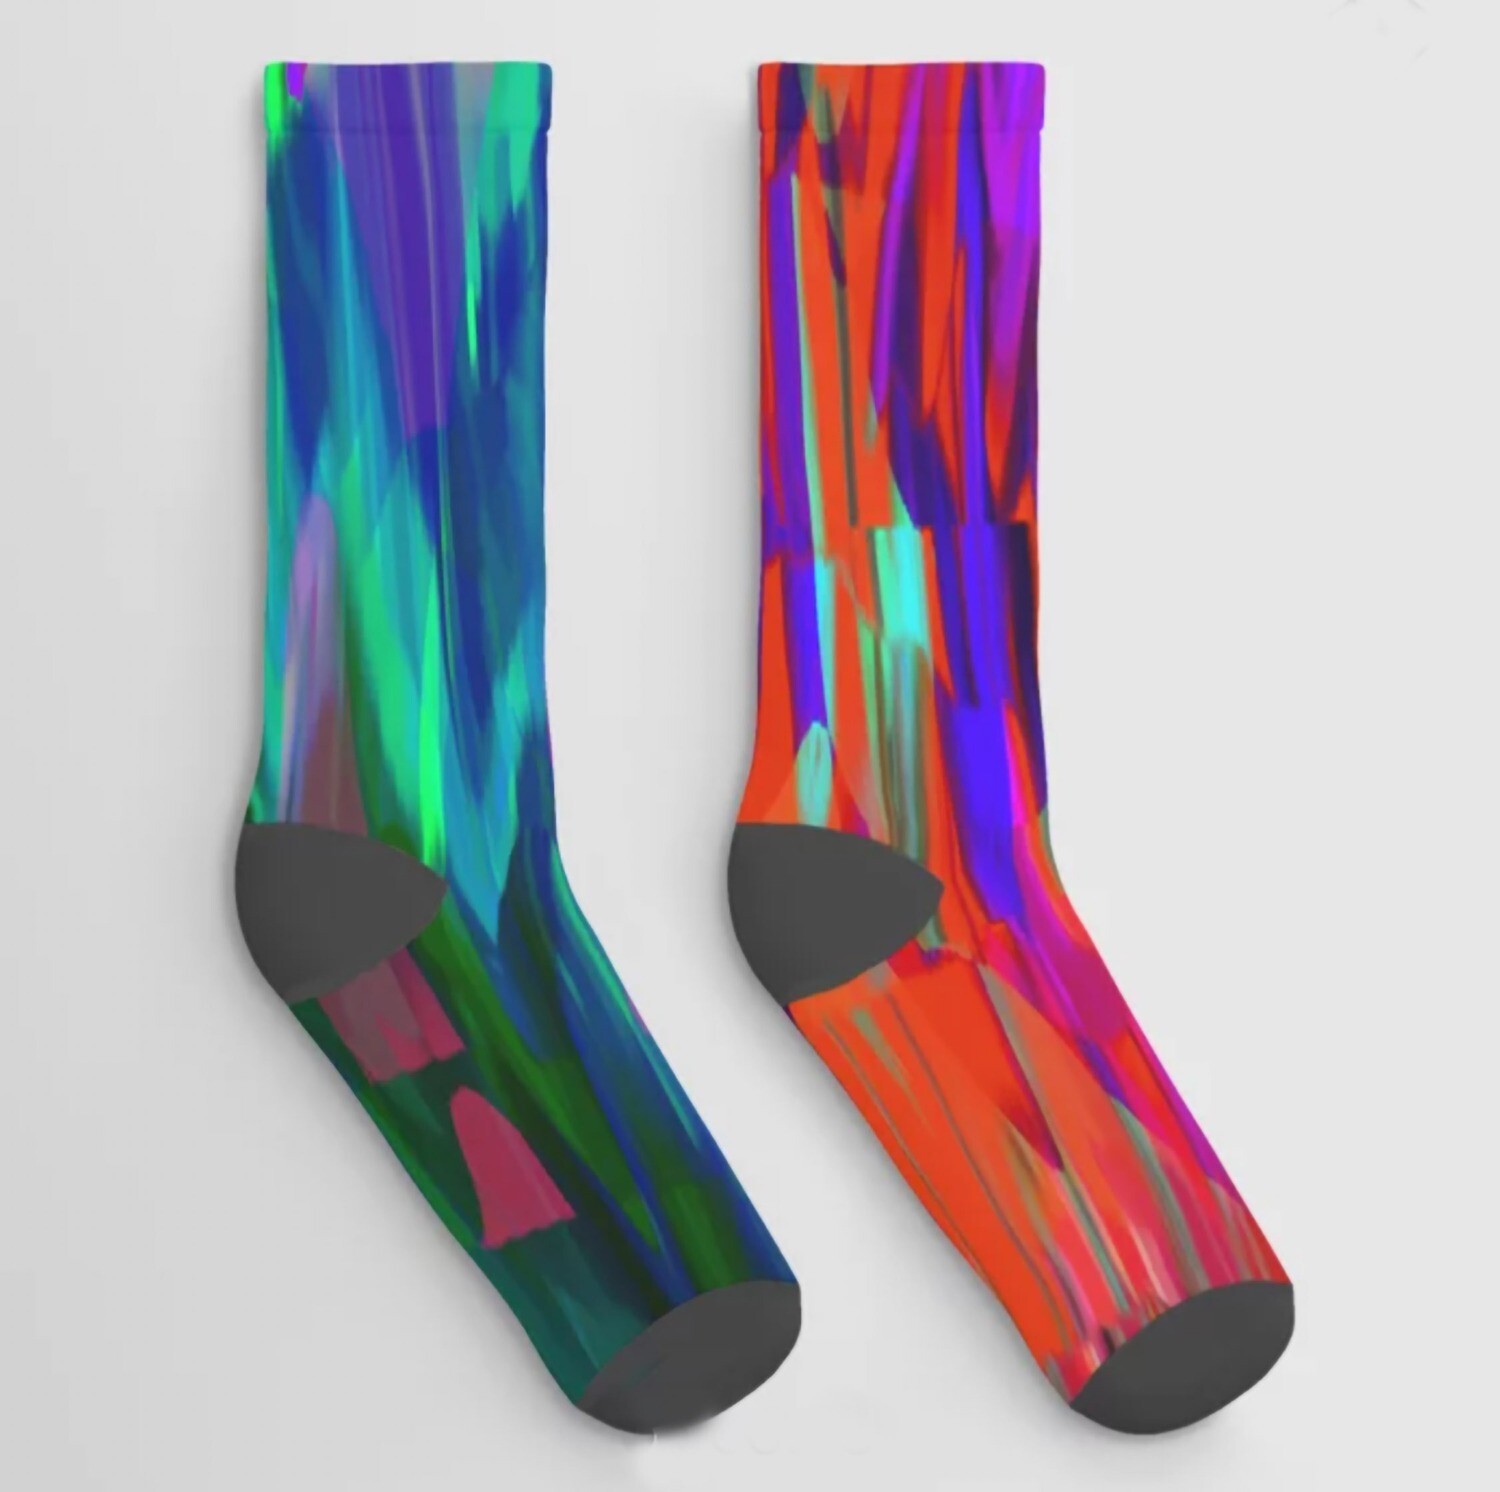 Fits of Colour - Funky Socks